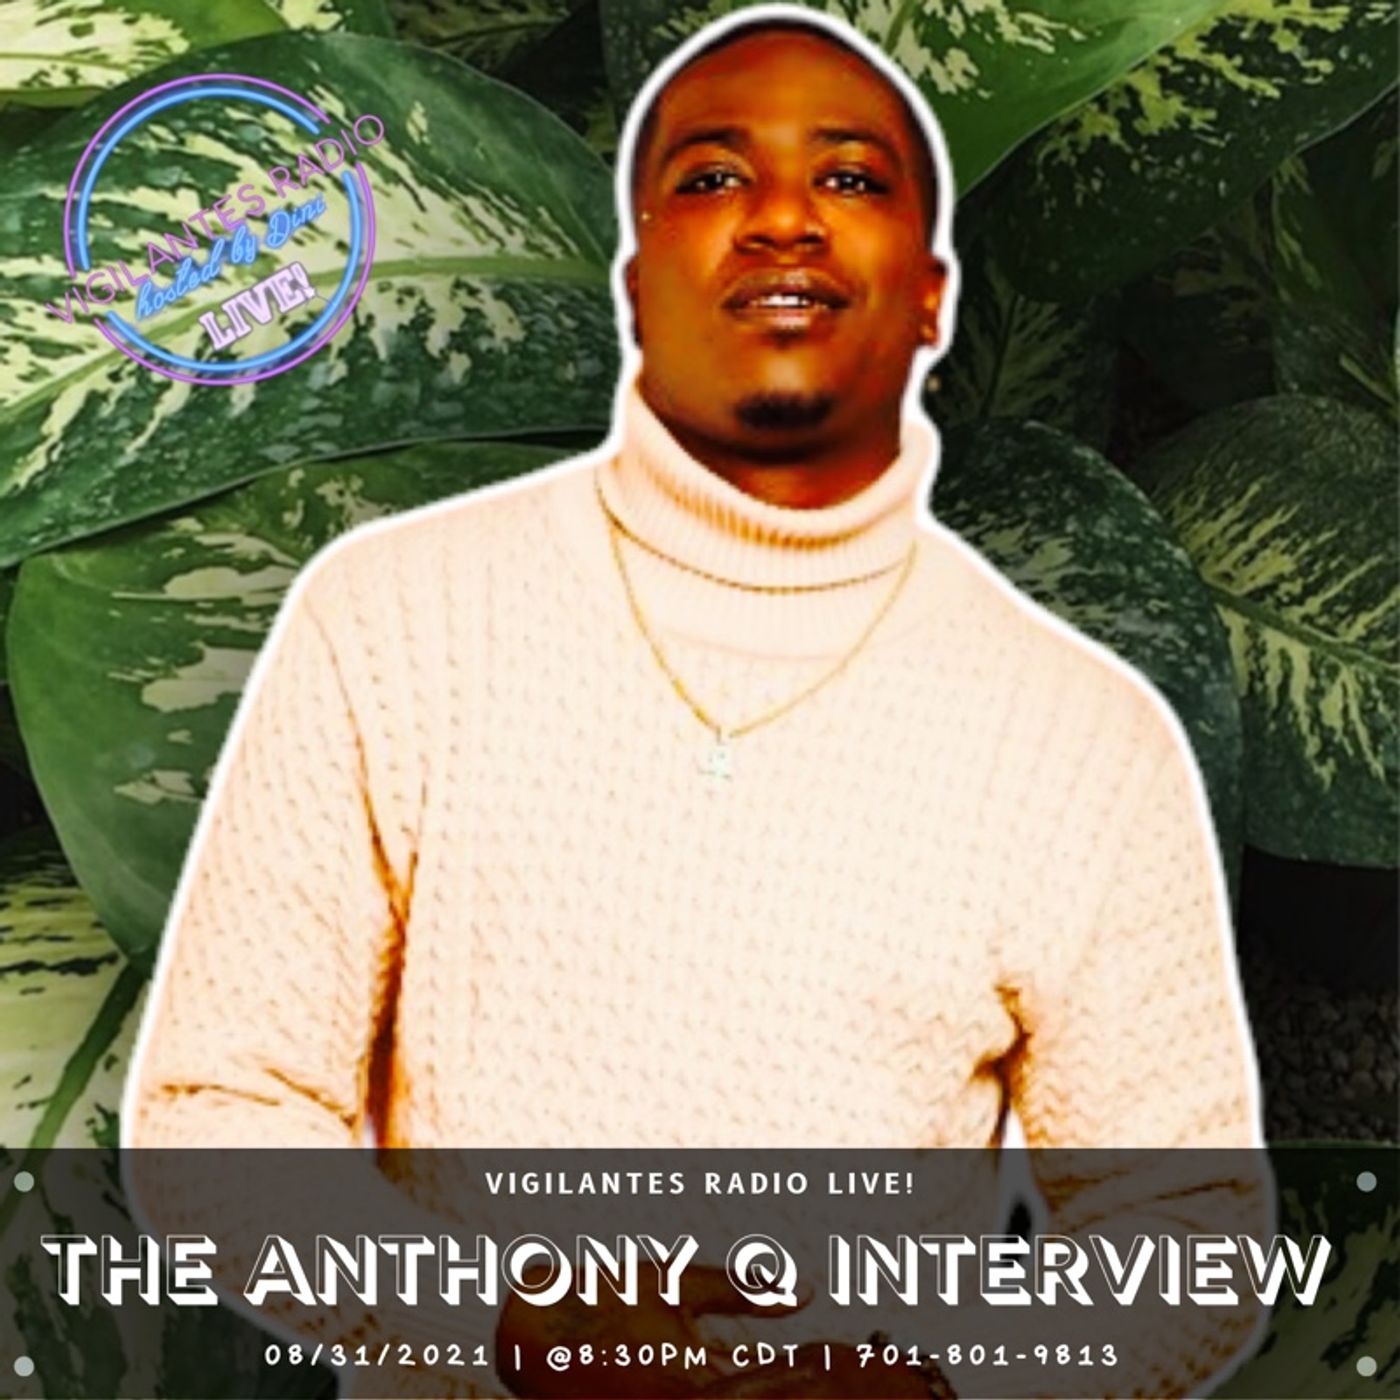 The Anthony Q Interview. Image